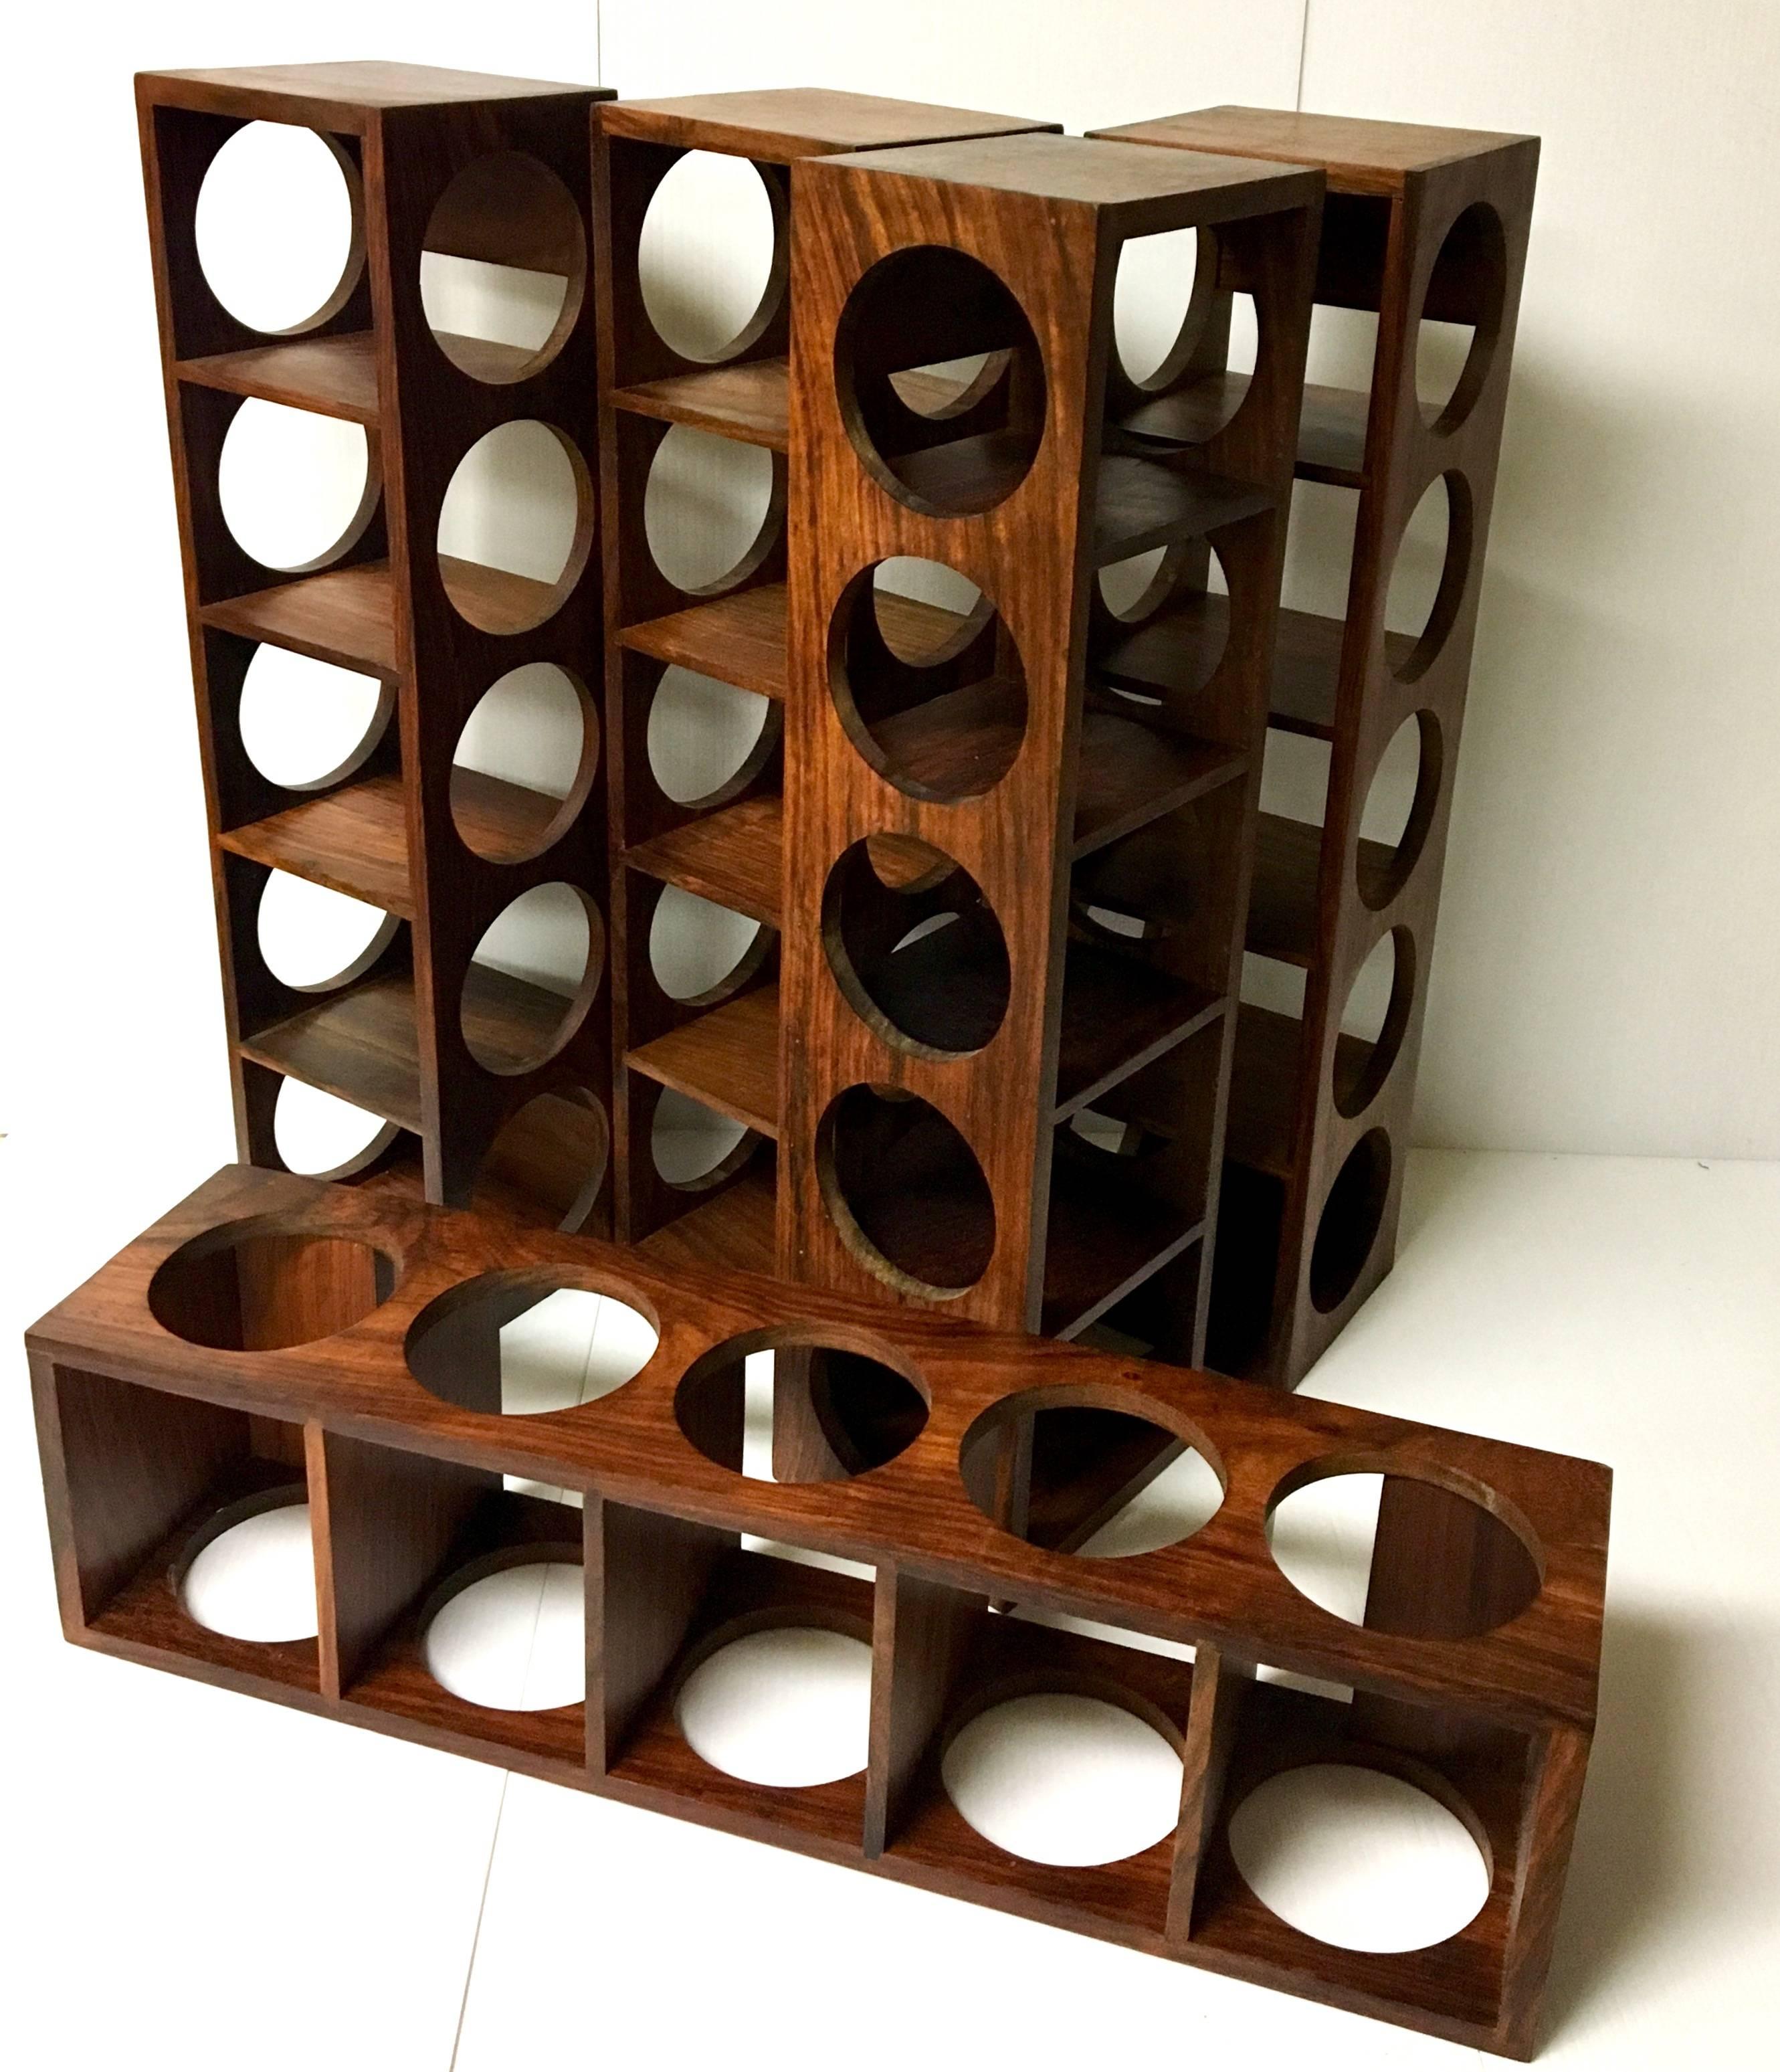 A rare Danish modern, five bottle capacity, solid rosewood wine. The racks are easy to install and in great condition. Five racks are available and they are priced individually; buy 1 or all 5!